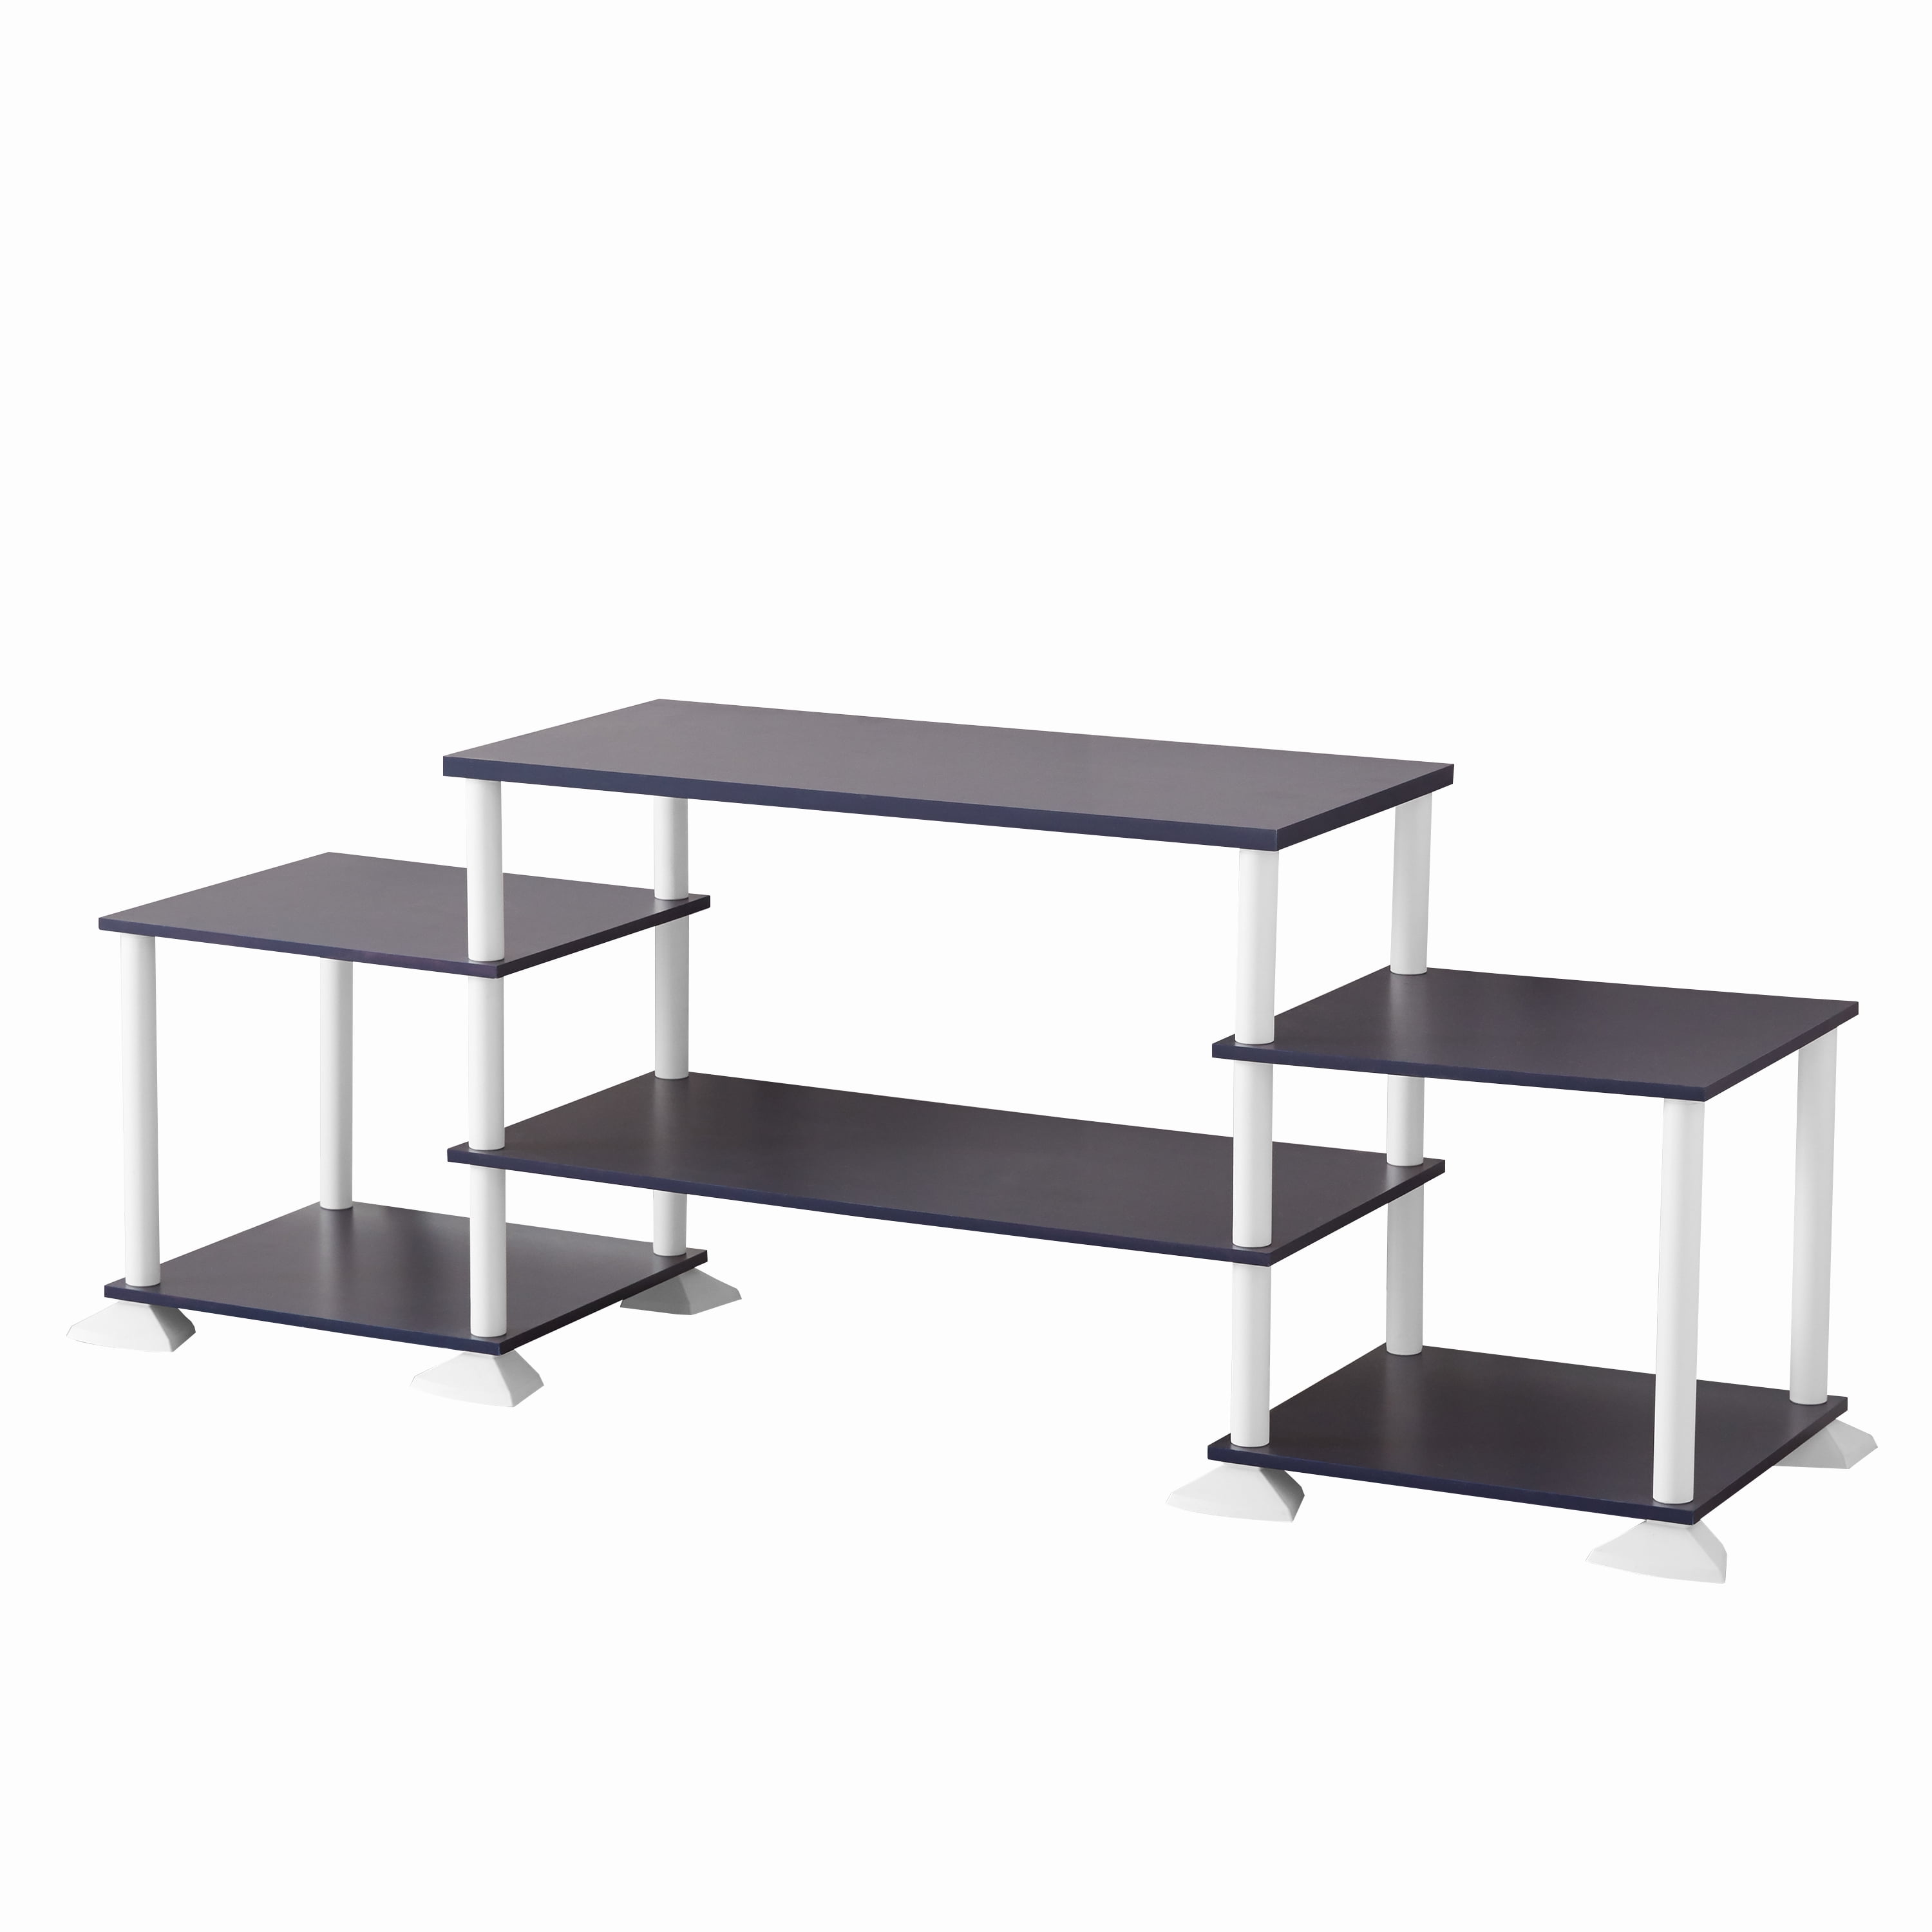 Details about   TV STAND 3-Cube Storage Open Shelf For TVs up to 40" Multiple Colors 